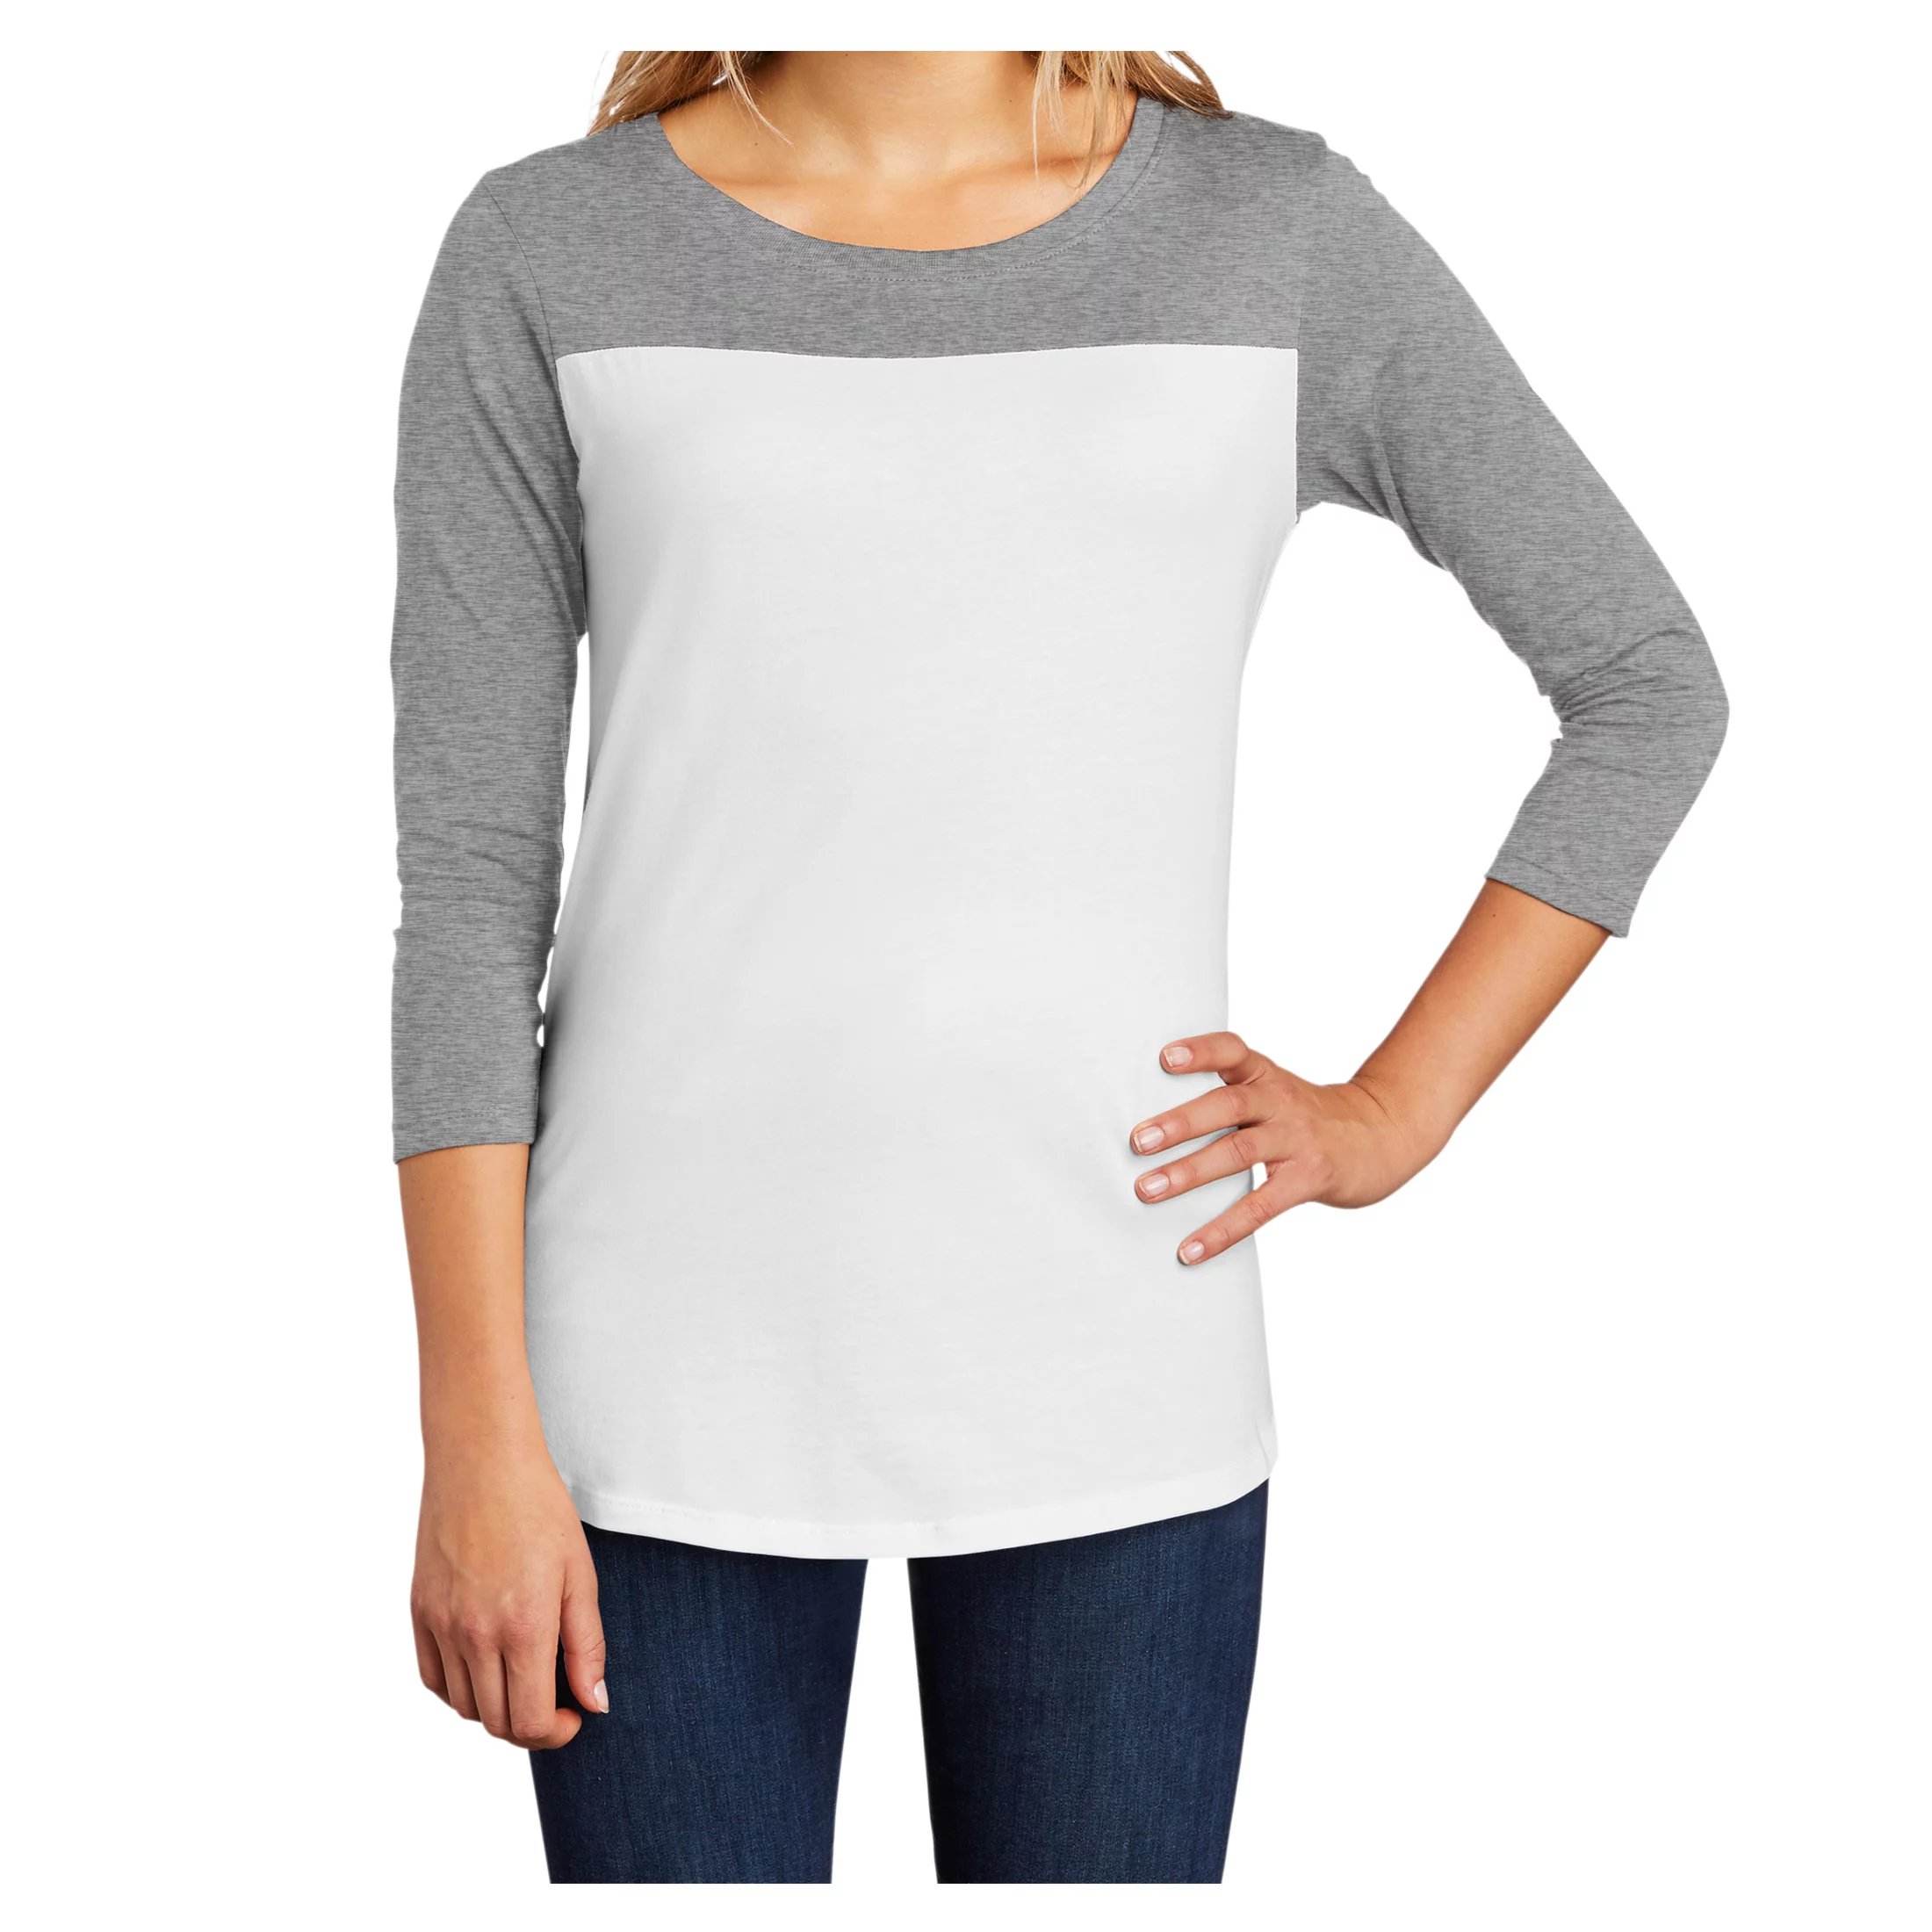 Wholesale Womens 3:4 Sleeve T Shirts Supplier In Oman